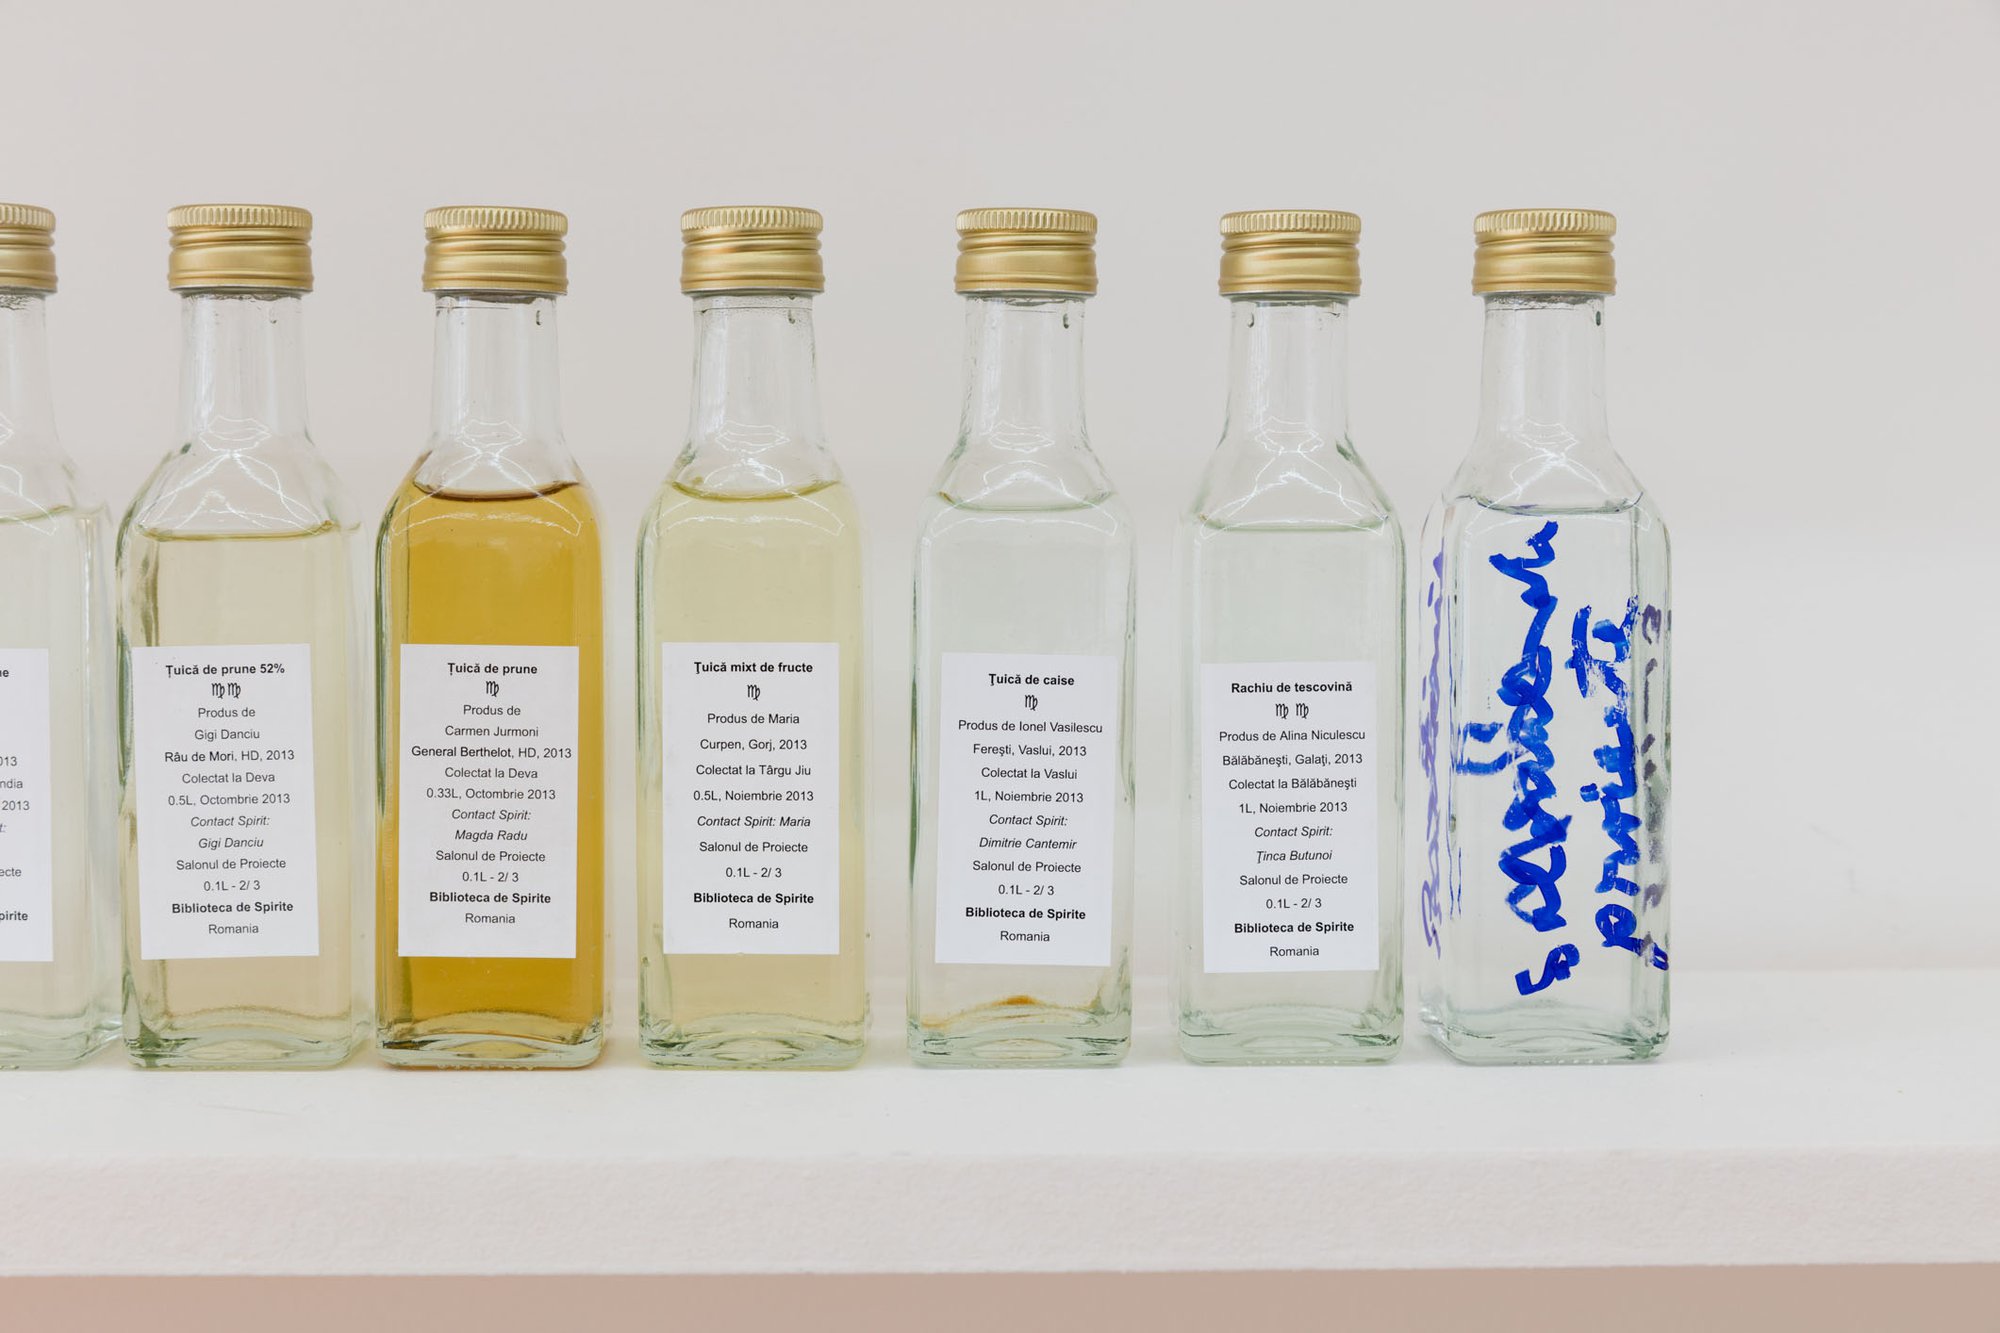 Banu Cennetoğlu, Library of Spirits I: BANUBARMIXT, detail, an assortment of 111 home-made, non-commercial spirits produced and collected in Romania, packaged in 100ml glass bottles, 2013